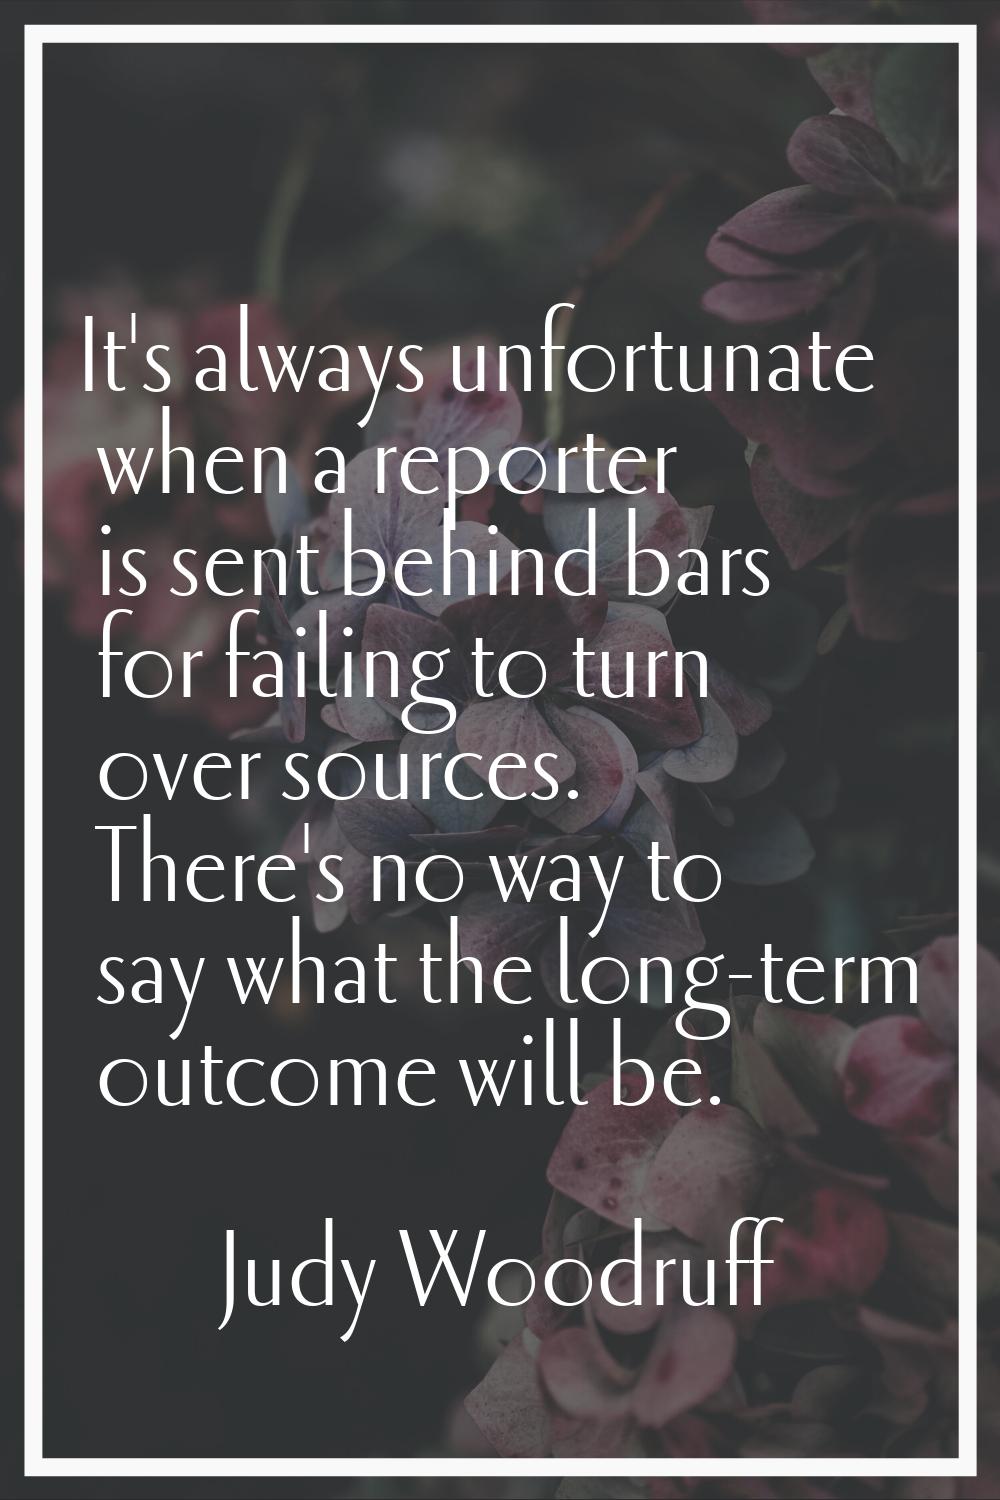 It's always unfortunate when a reporter is sent behind bars for failing to turn over sources. There